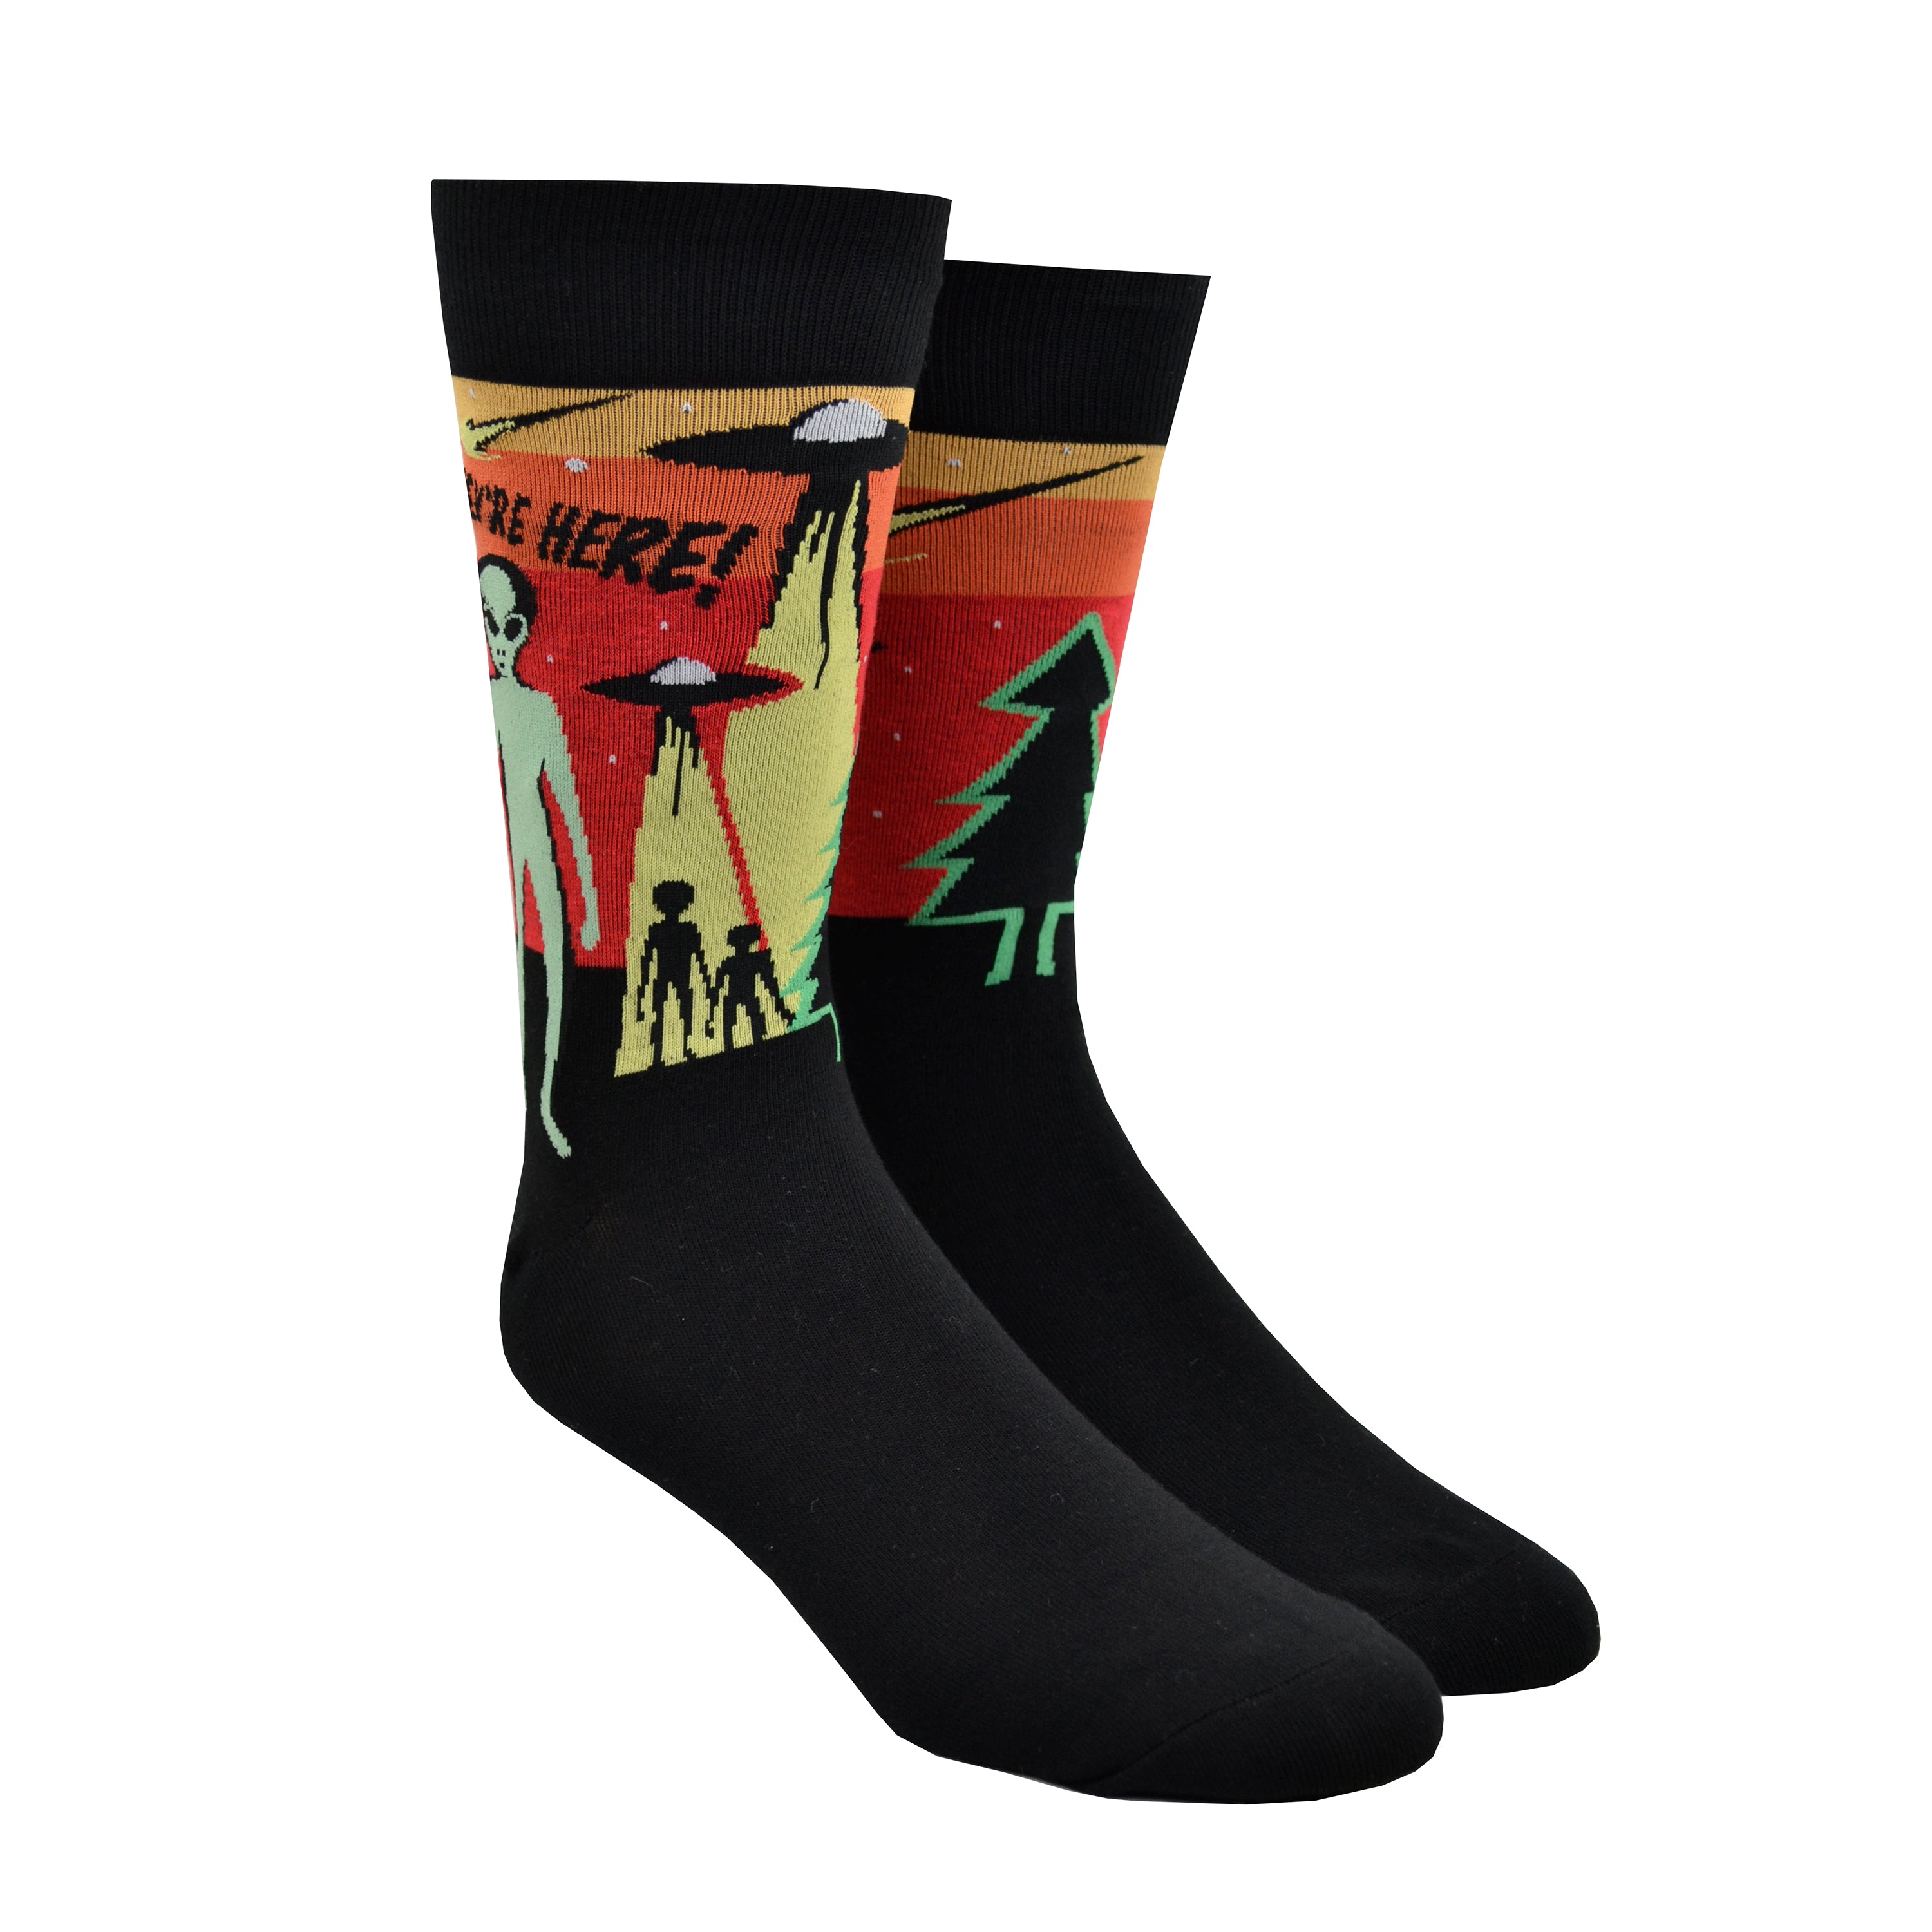 Shown on foot forms side by side, a pair Sock It to Me cotton men's crew socks in black with a yellow, orange, and red background on the leg featuring a green alien and 2 space ships. The text on the sock reads, 